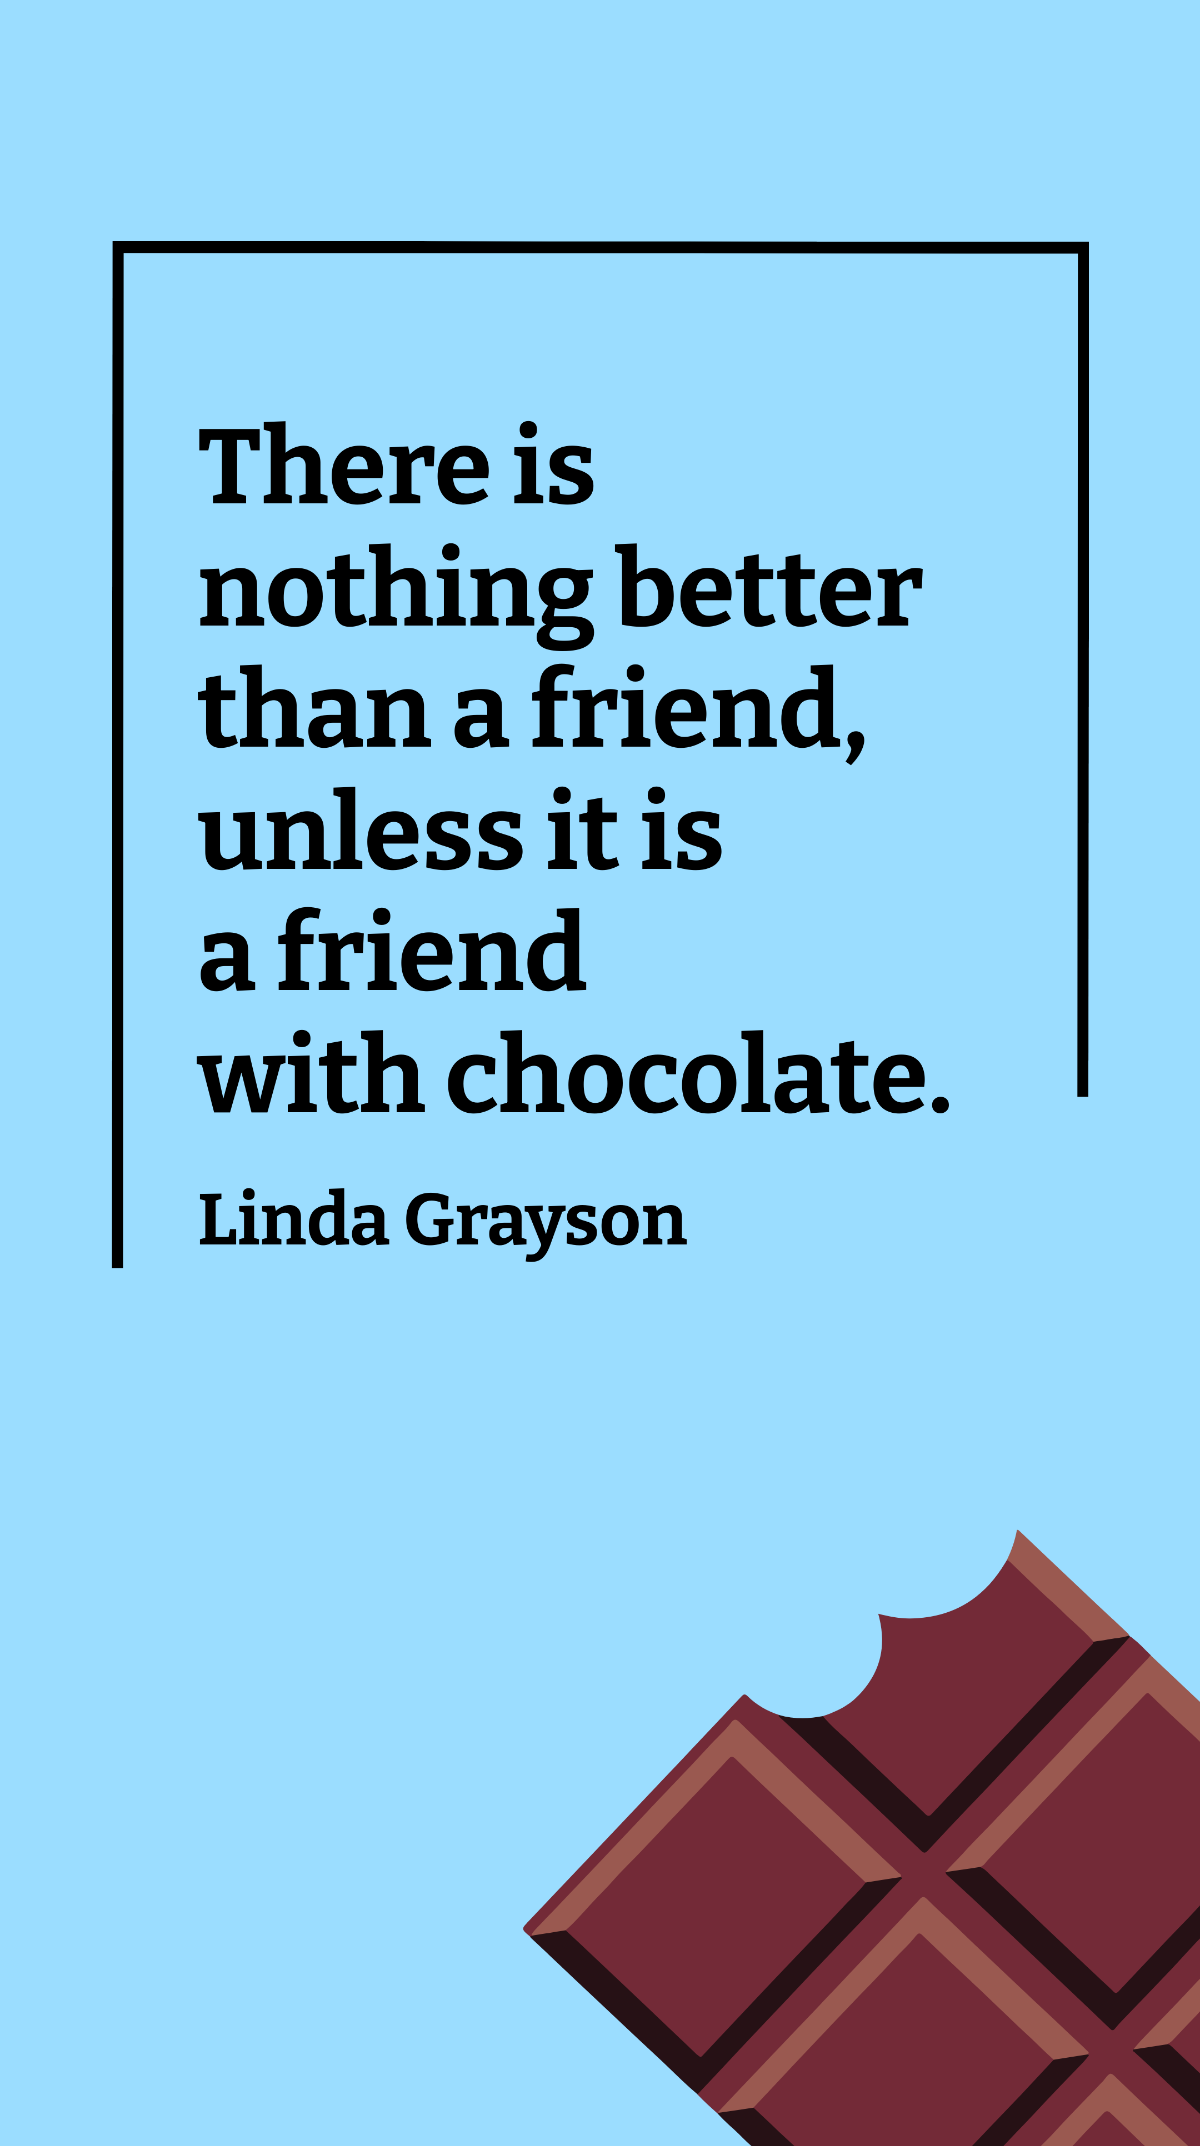 Linda Grayson - There is nothing better than a friend, unless it is a friend with chocolate. Template